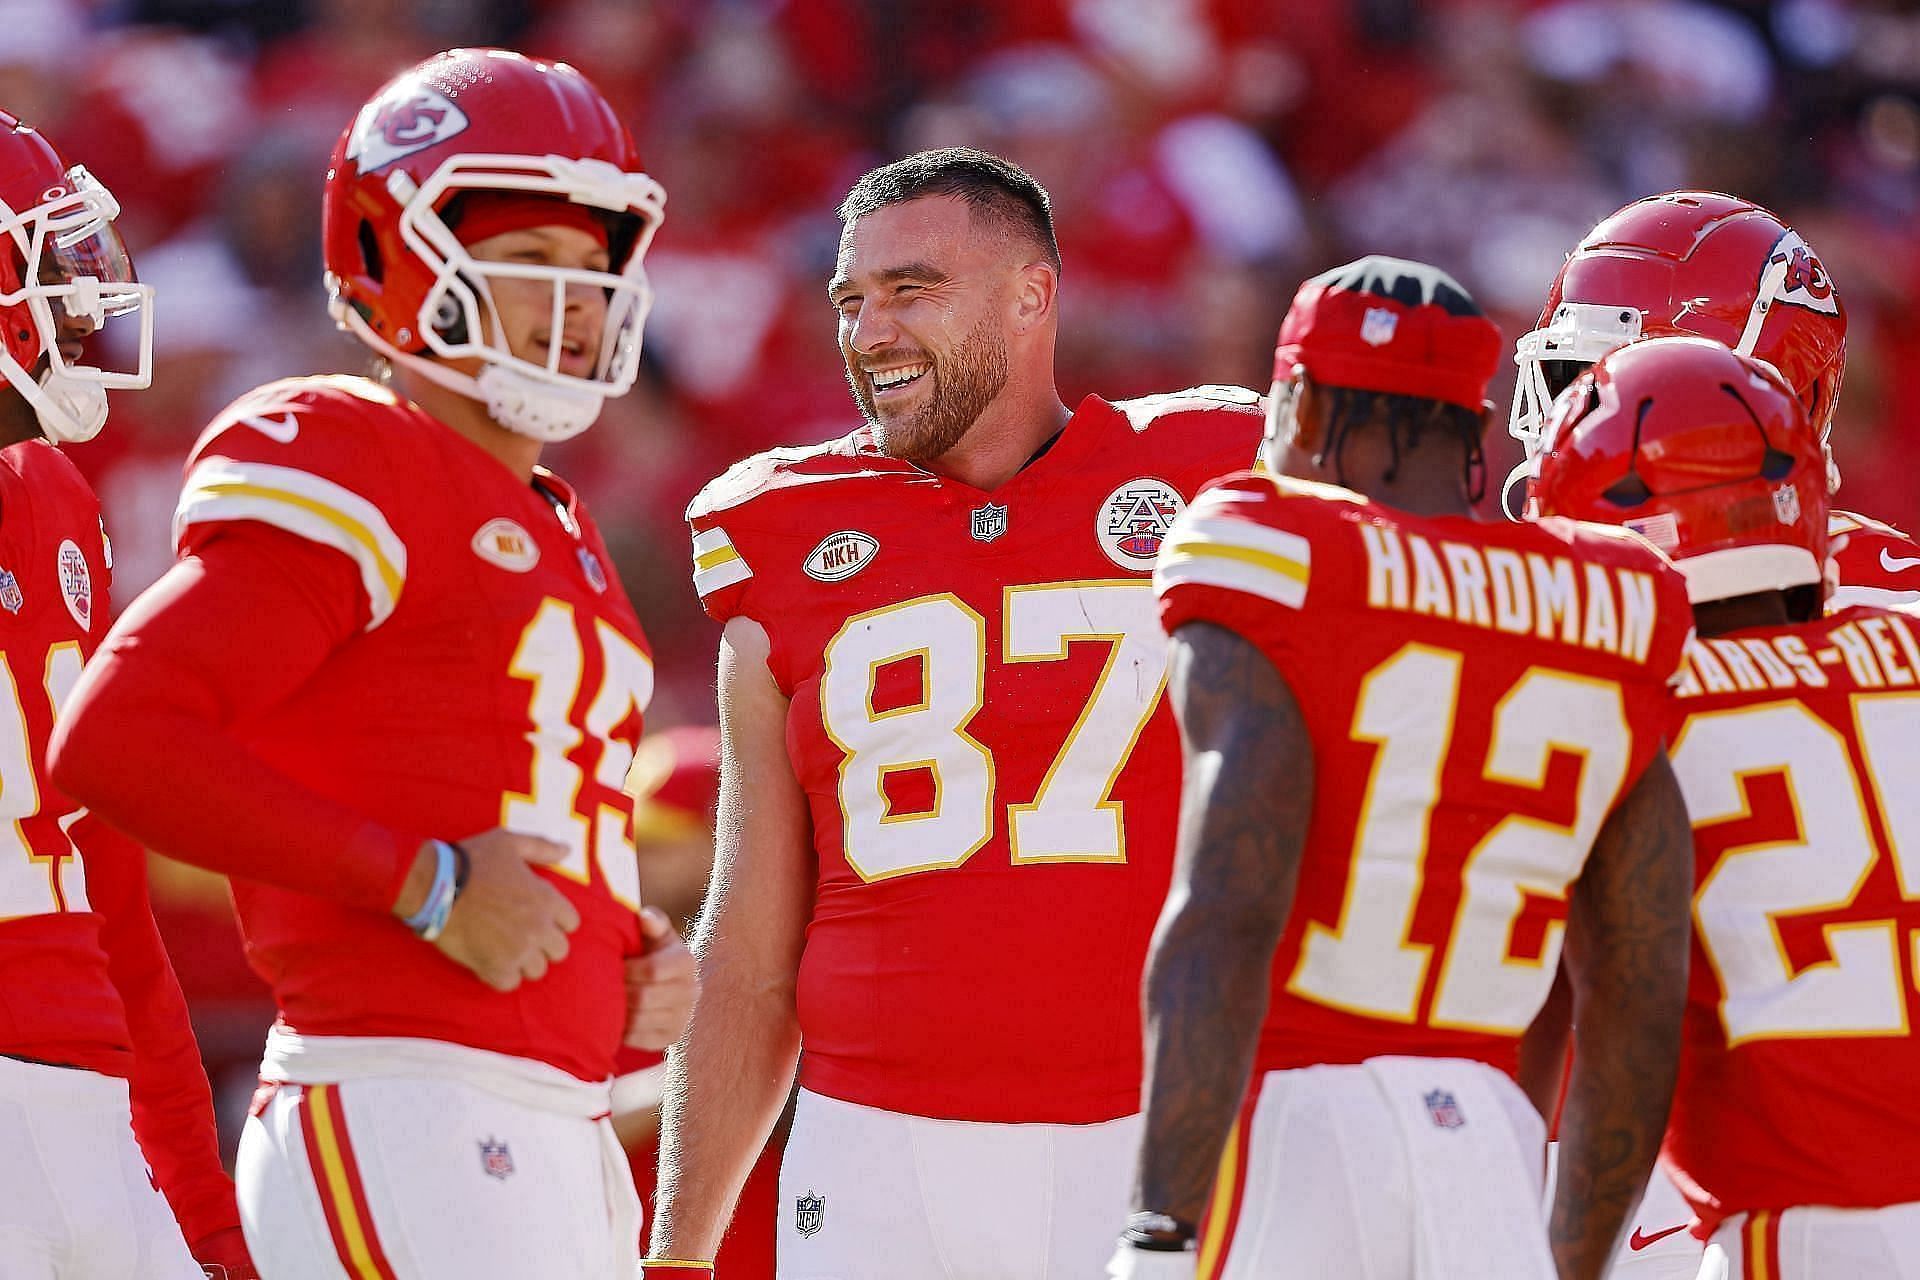 Mike Florio claims Patrick Mahomes and Travis Kelce are getting carried to top AFC seed - “The Chiefs are flawed” - Mnews